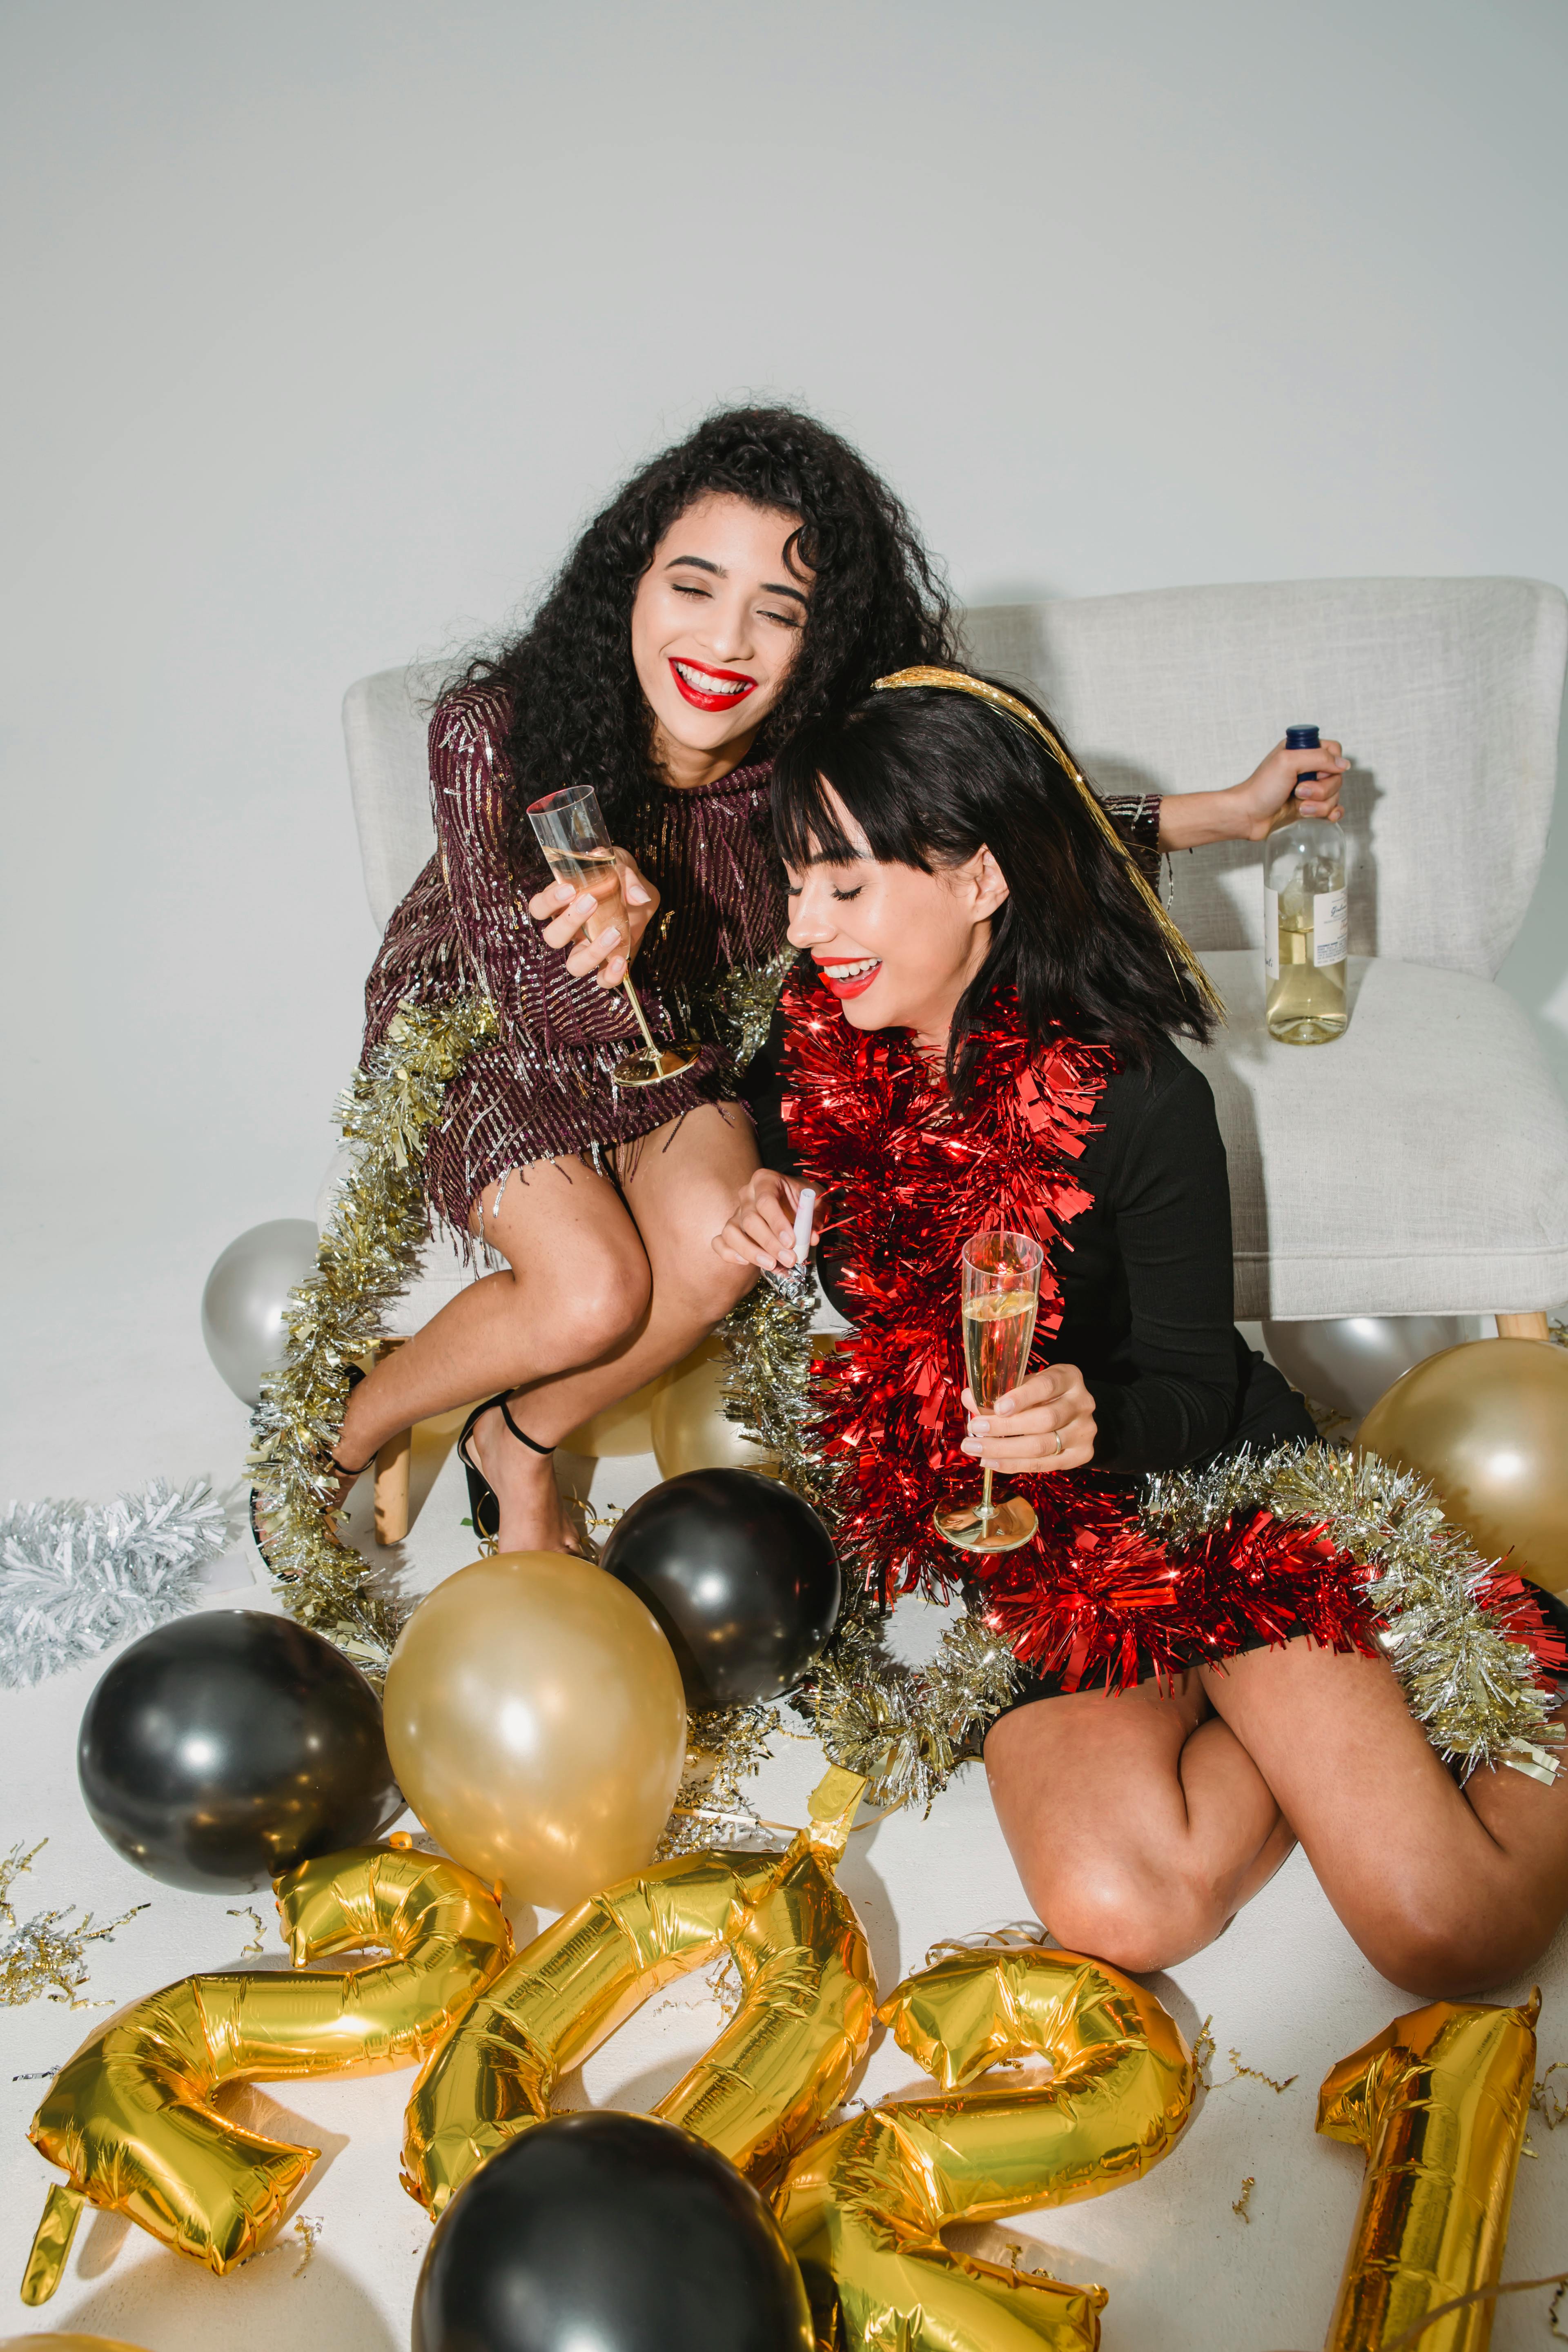 Laughing young females wearing stylish mini dresses and shiny tinsels on neck drinking sparkling champagne while sitting on floor near balloons during new year celebration party